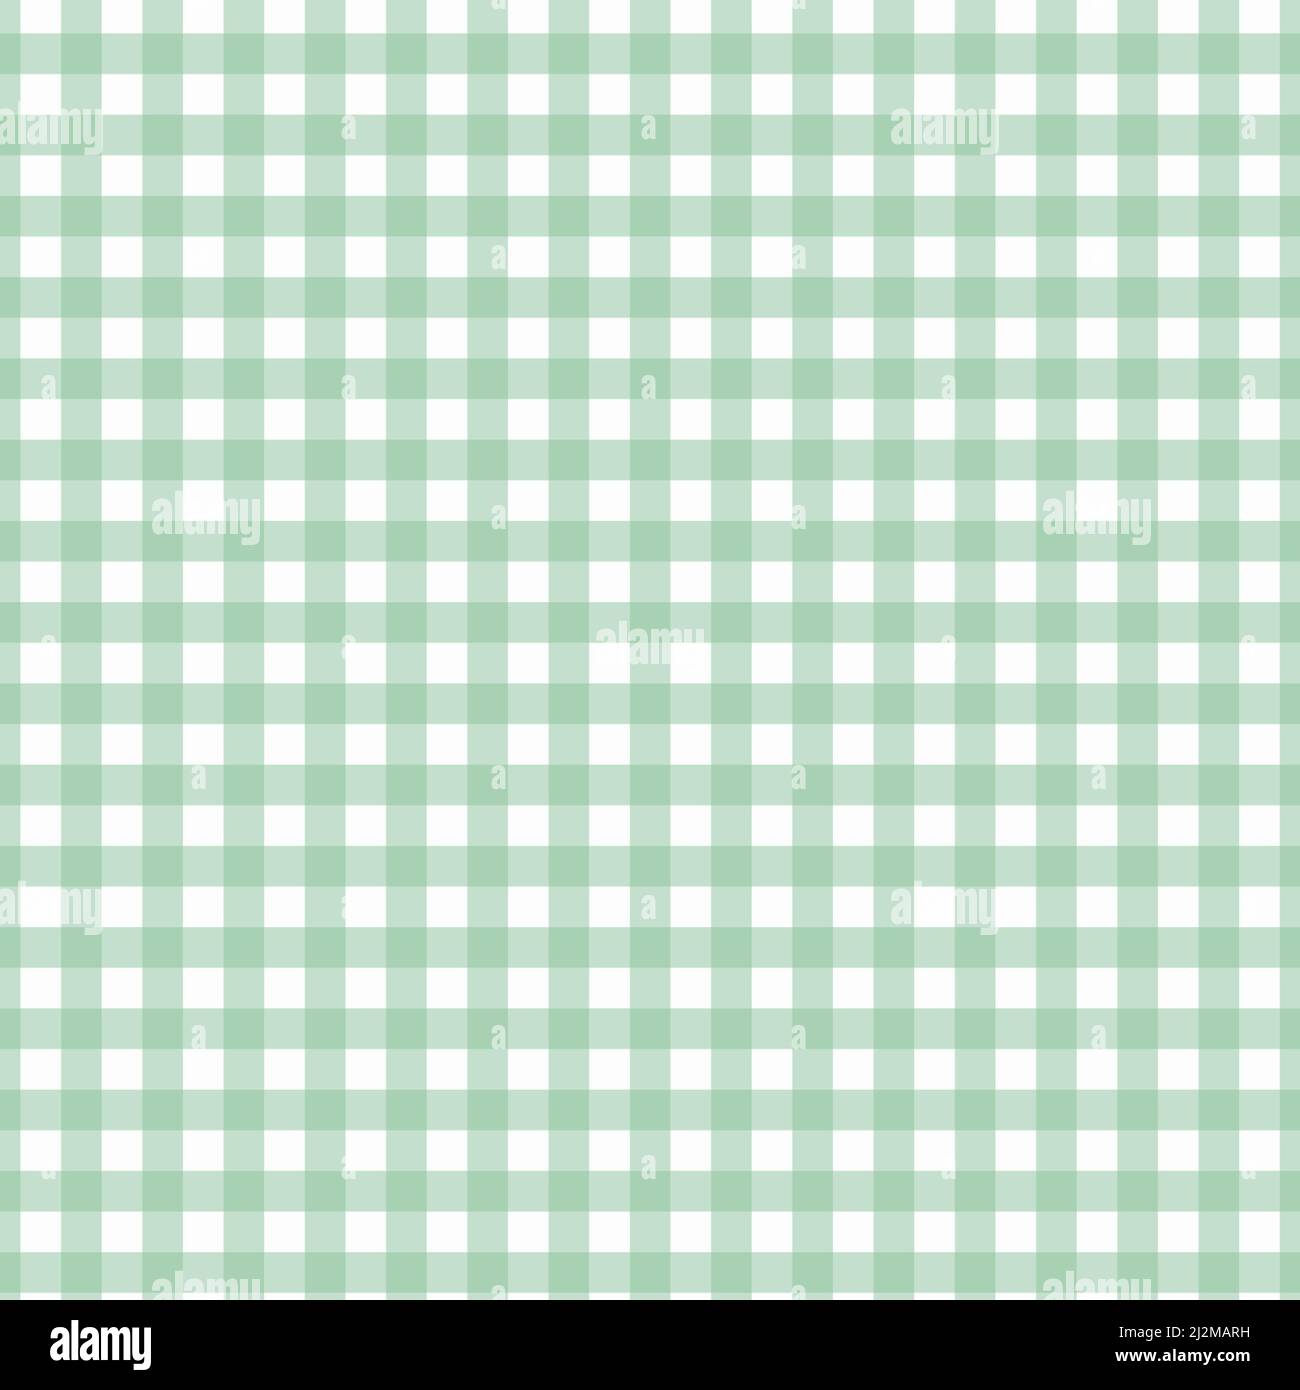 Green and white buffalo plaid pattern in a cool minty green checkered print design element. Stock Photo